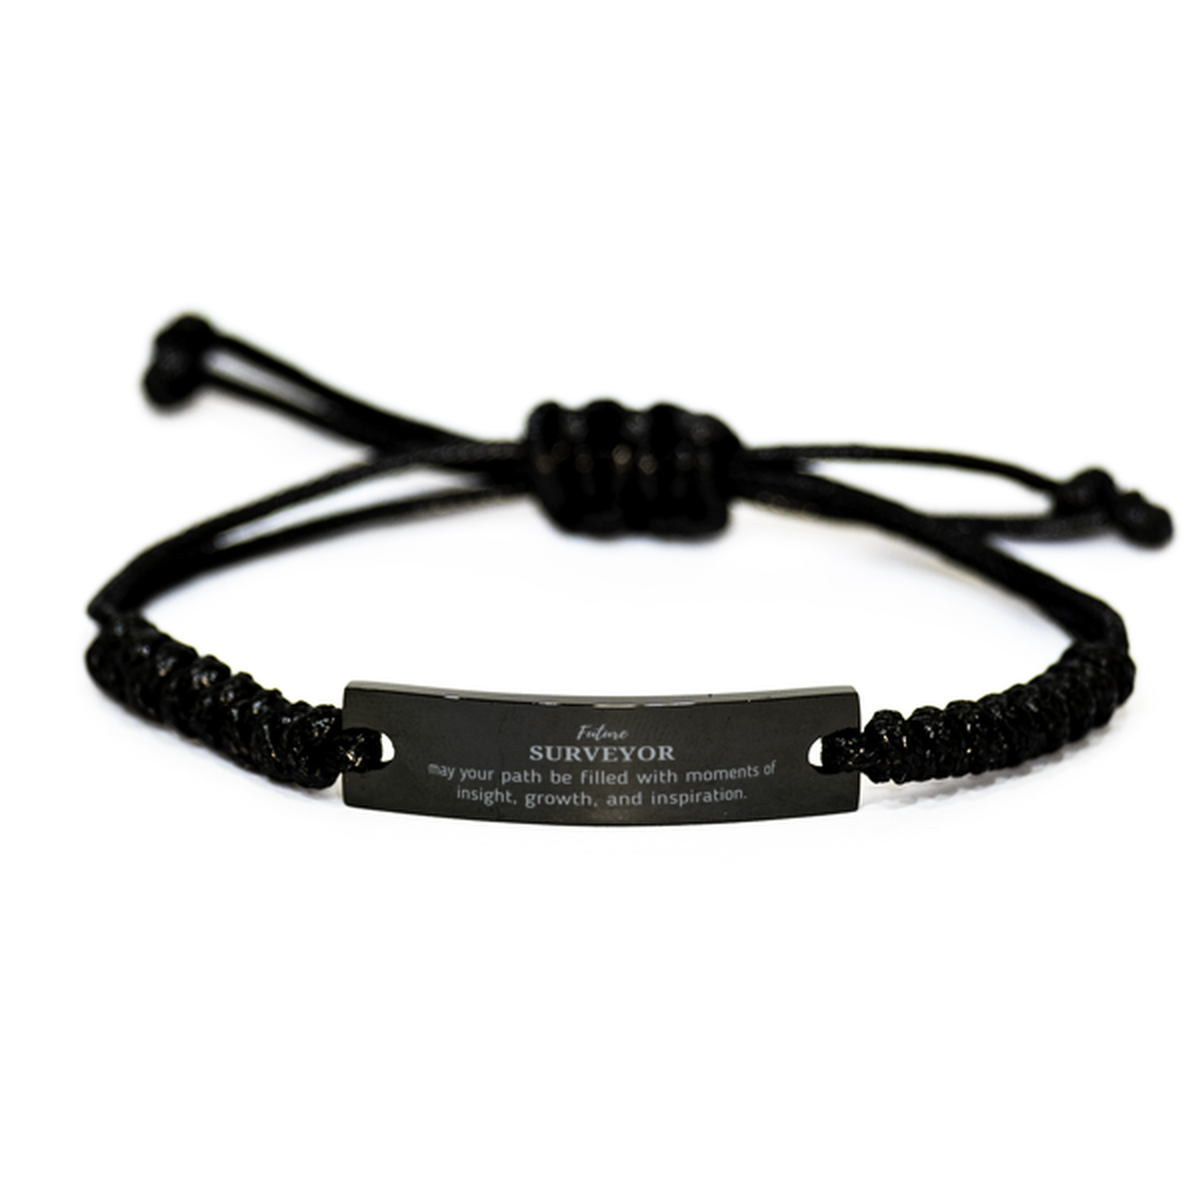 Future Surveyor Gifts, May your path be filled with moments of insight, Graduation Gifts for New Surveyor, Christmas Unique Black Rope Bracelet For Men, Women, Friends